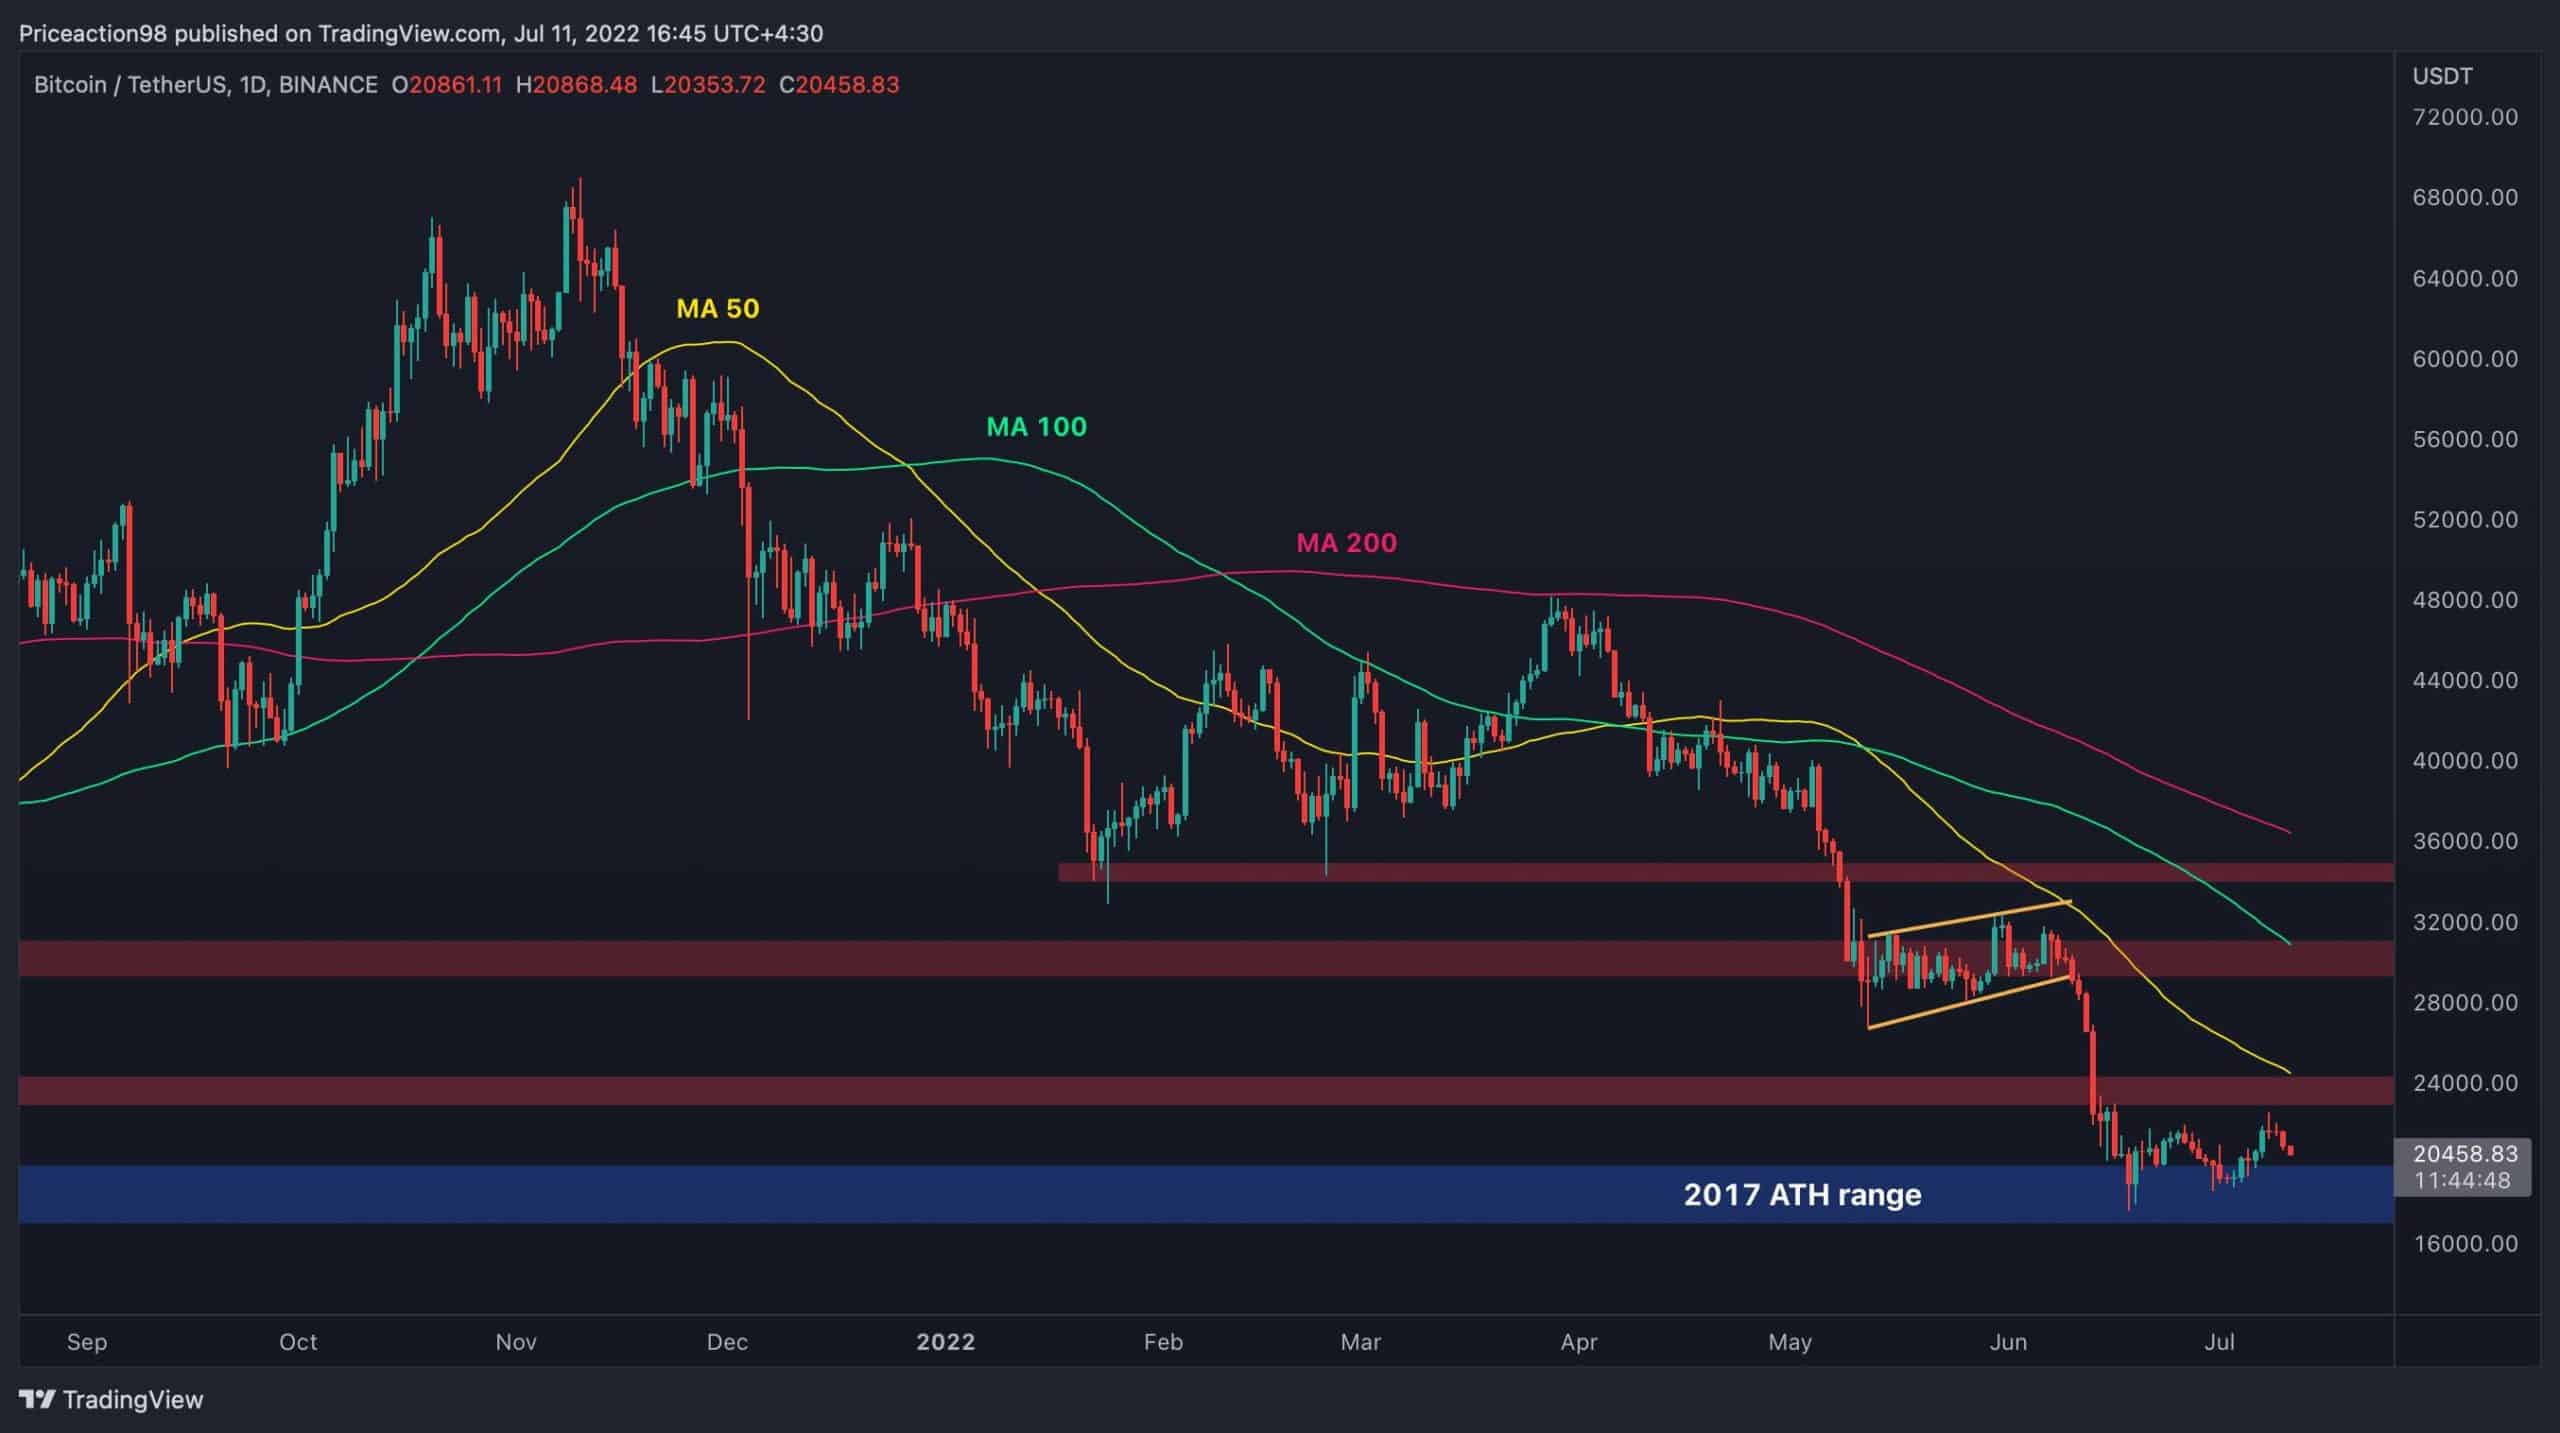 Bearish-signs-for-btc-reapper,-will-$20k-hold-or-more-pain-ahead?-(bitcoin-price-analysis)